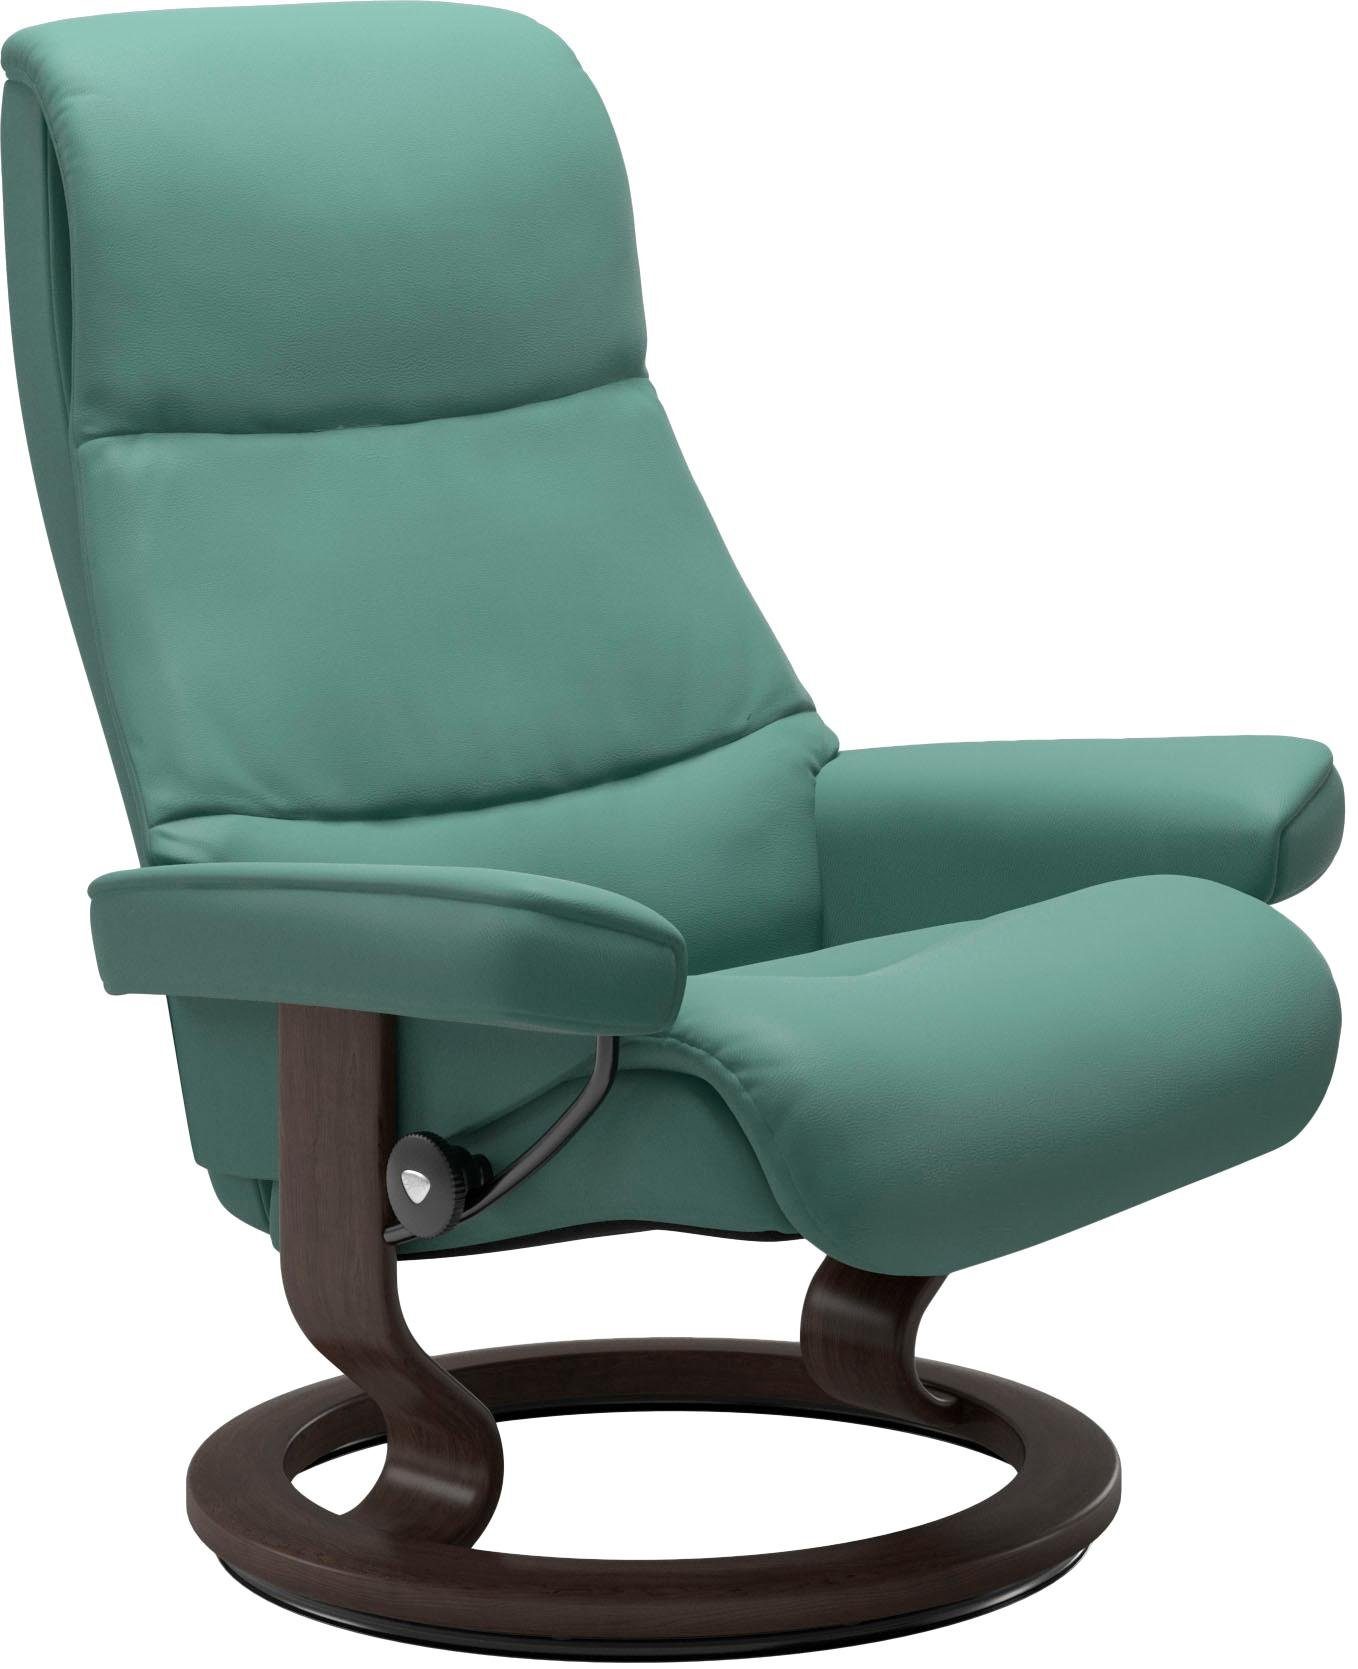 Base, Wenge Classic Größe M,Gestell mit Stressless® View, Relaxsessel